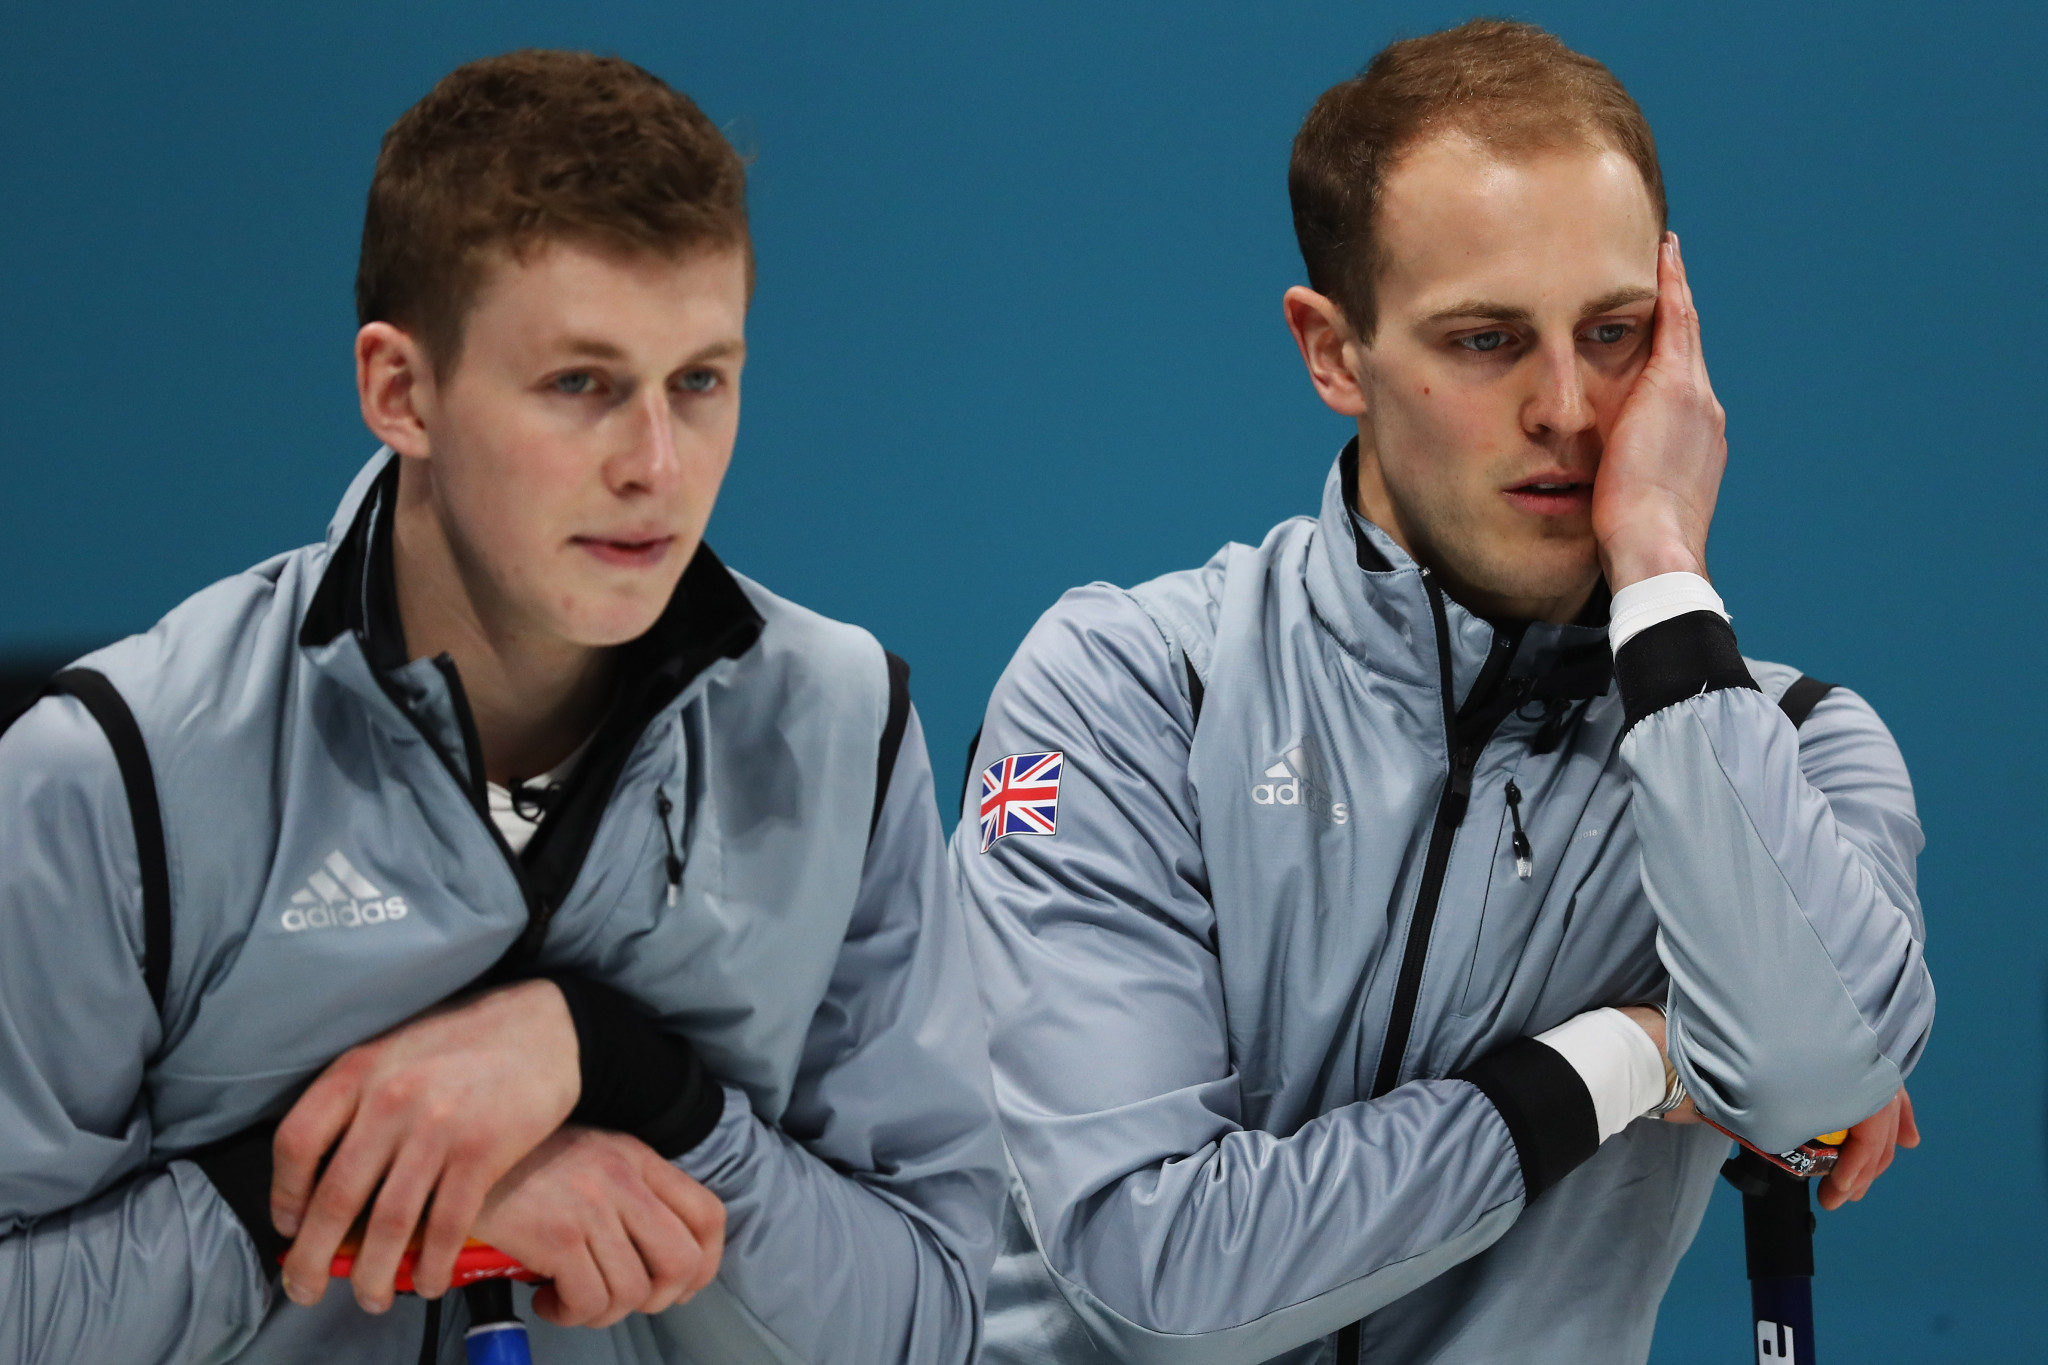 Thomas Muirhead, left, and Kyle Smith, right, competed at Pyeongchang 2018 with Smith as skip, but will now play second and third for Thomas' older brother Glen, at the Scottish Championships ©Getty Images